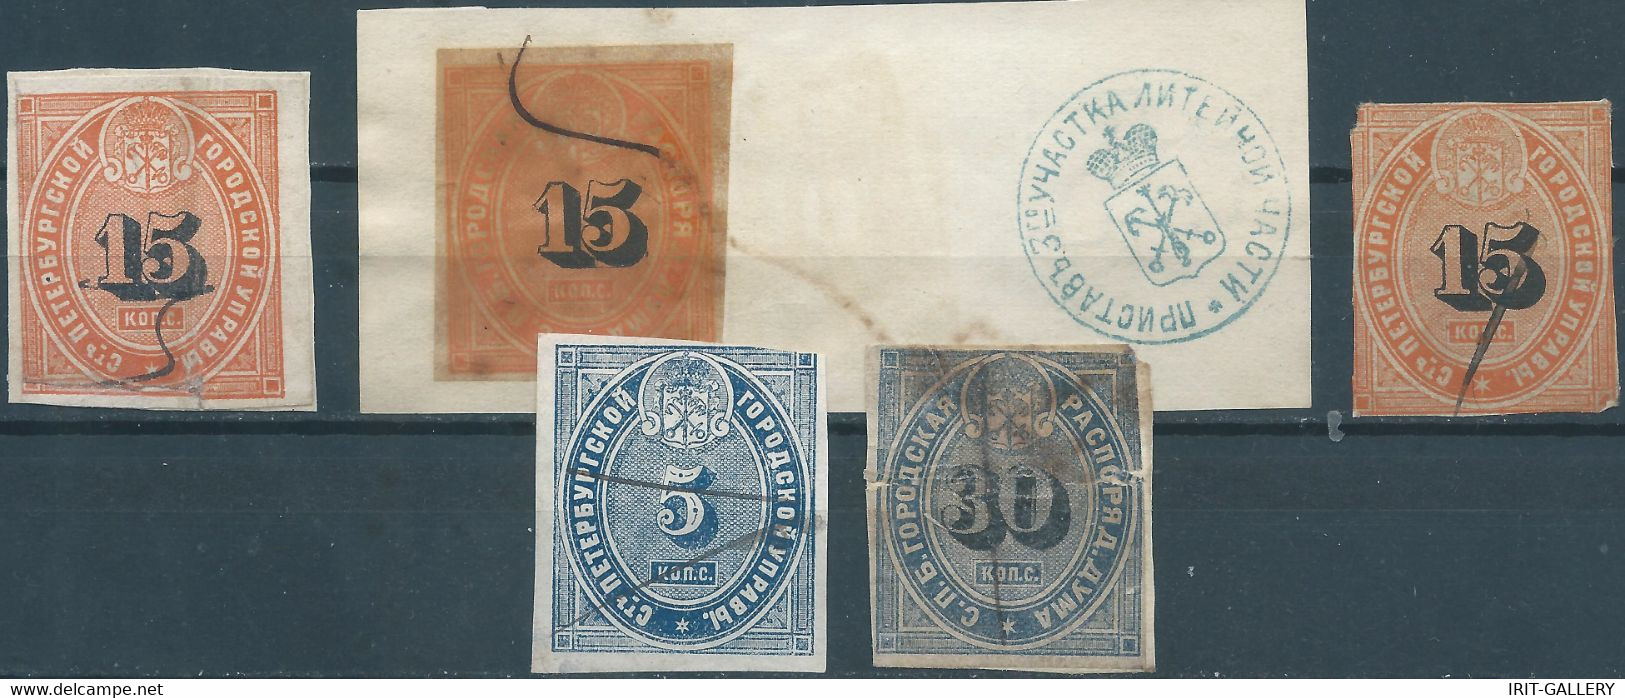 Russia - Russie - Russland,SAINT PETERSBURG 1860/1885 Revenue Stamps Tax And Services  Used On The Cut Paper,very Old - Fiscaux